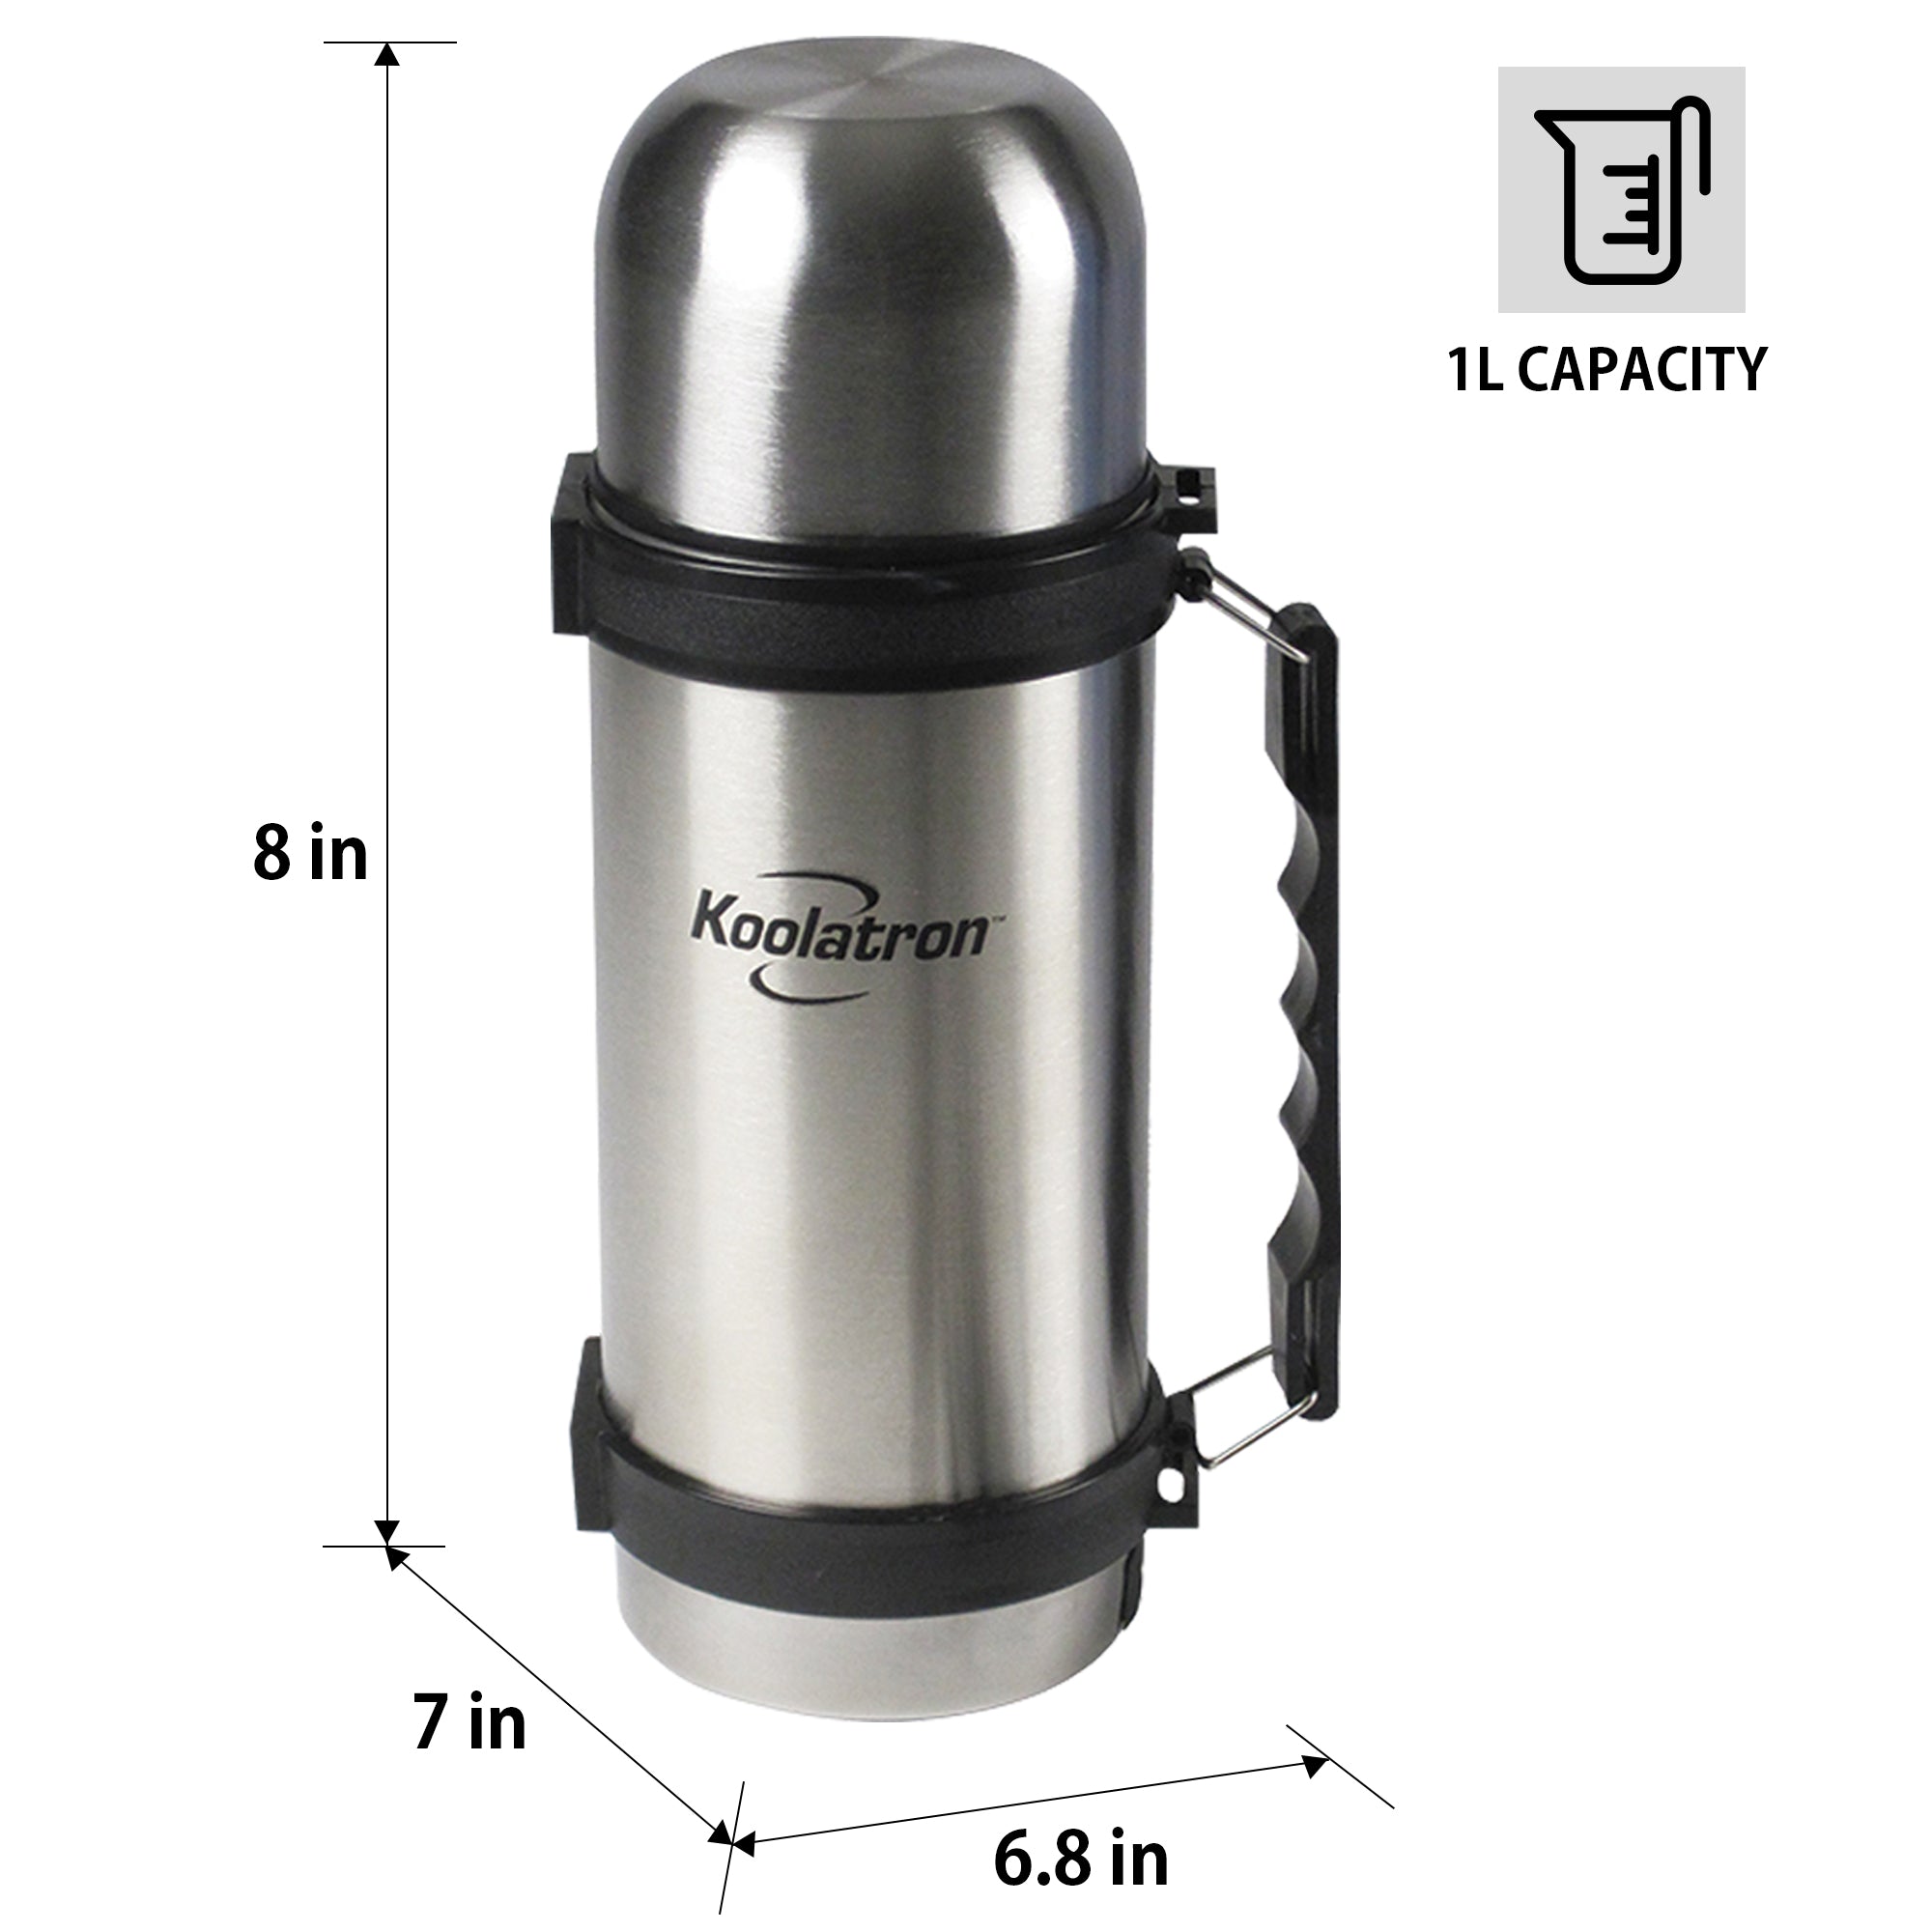 Product shot on a white background of the 1L insulated vacuum flask with dimensions and capacity labeled